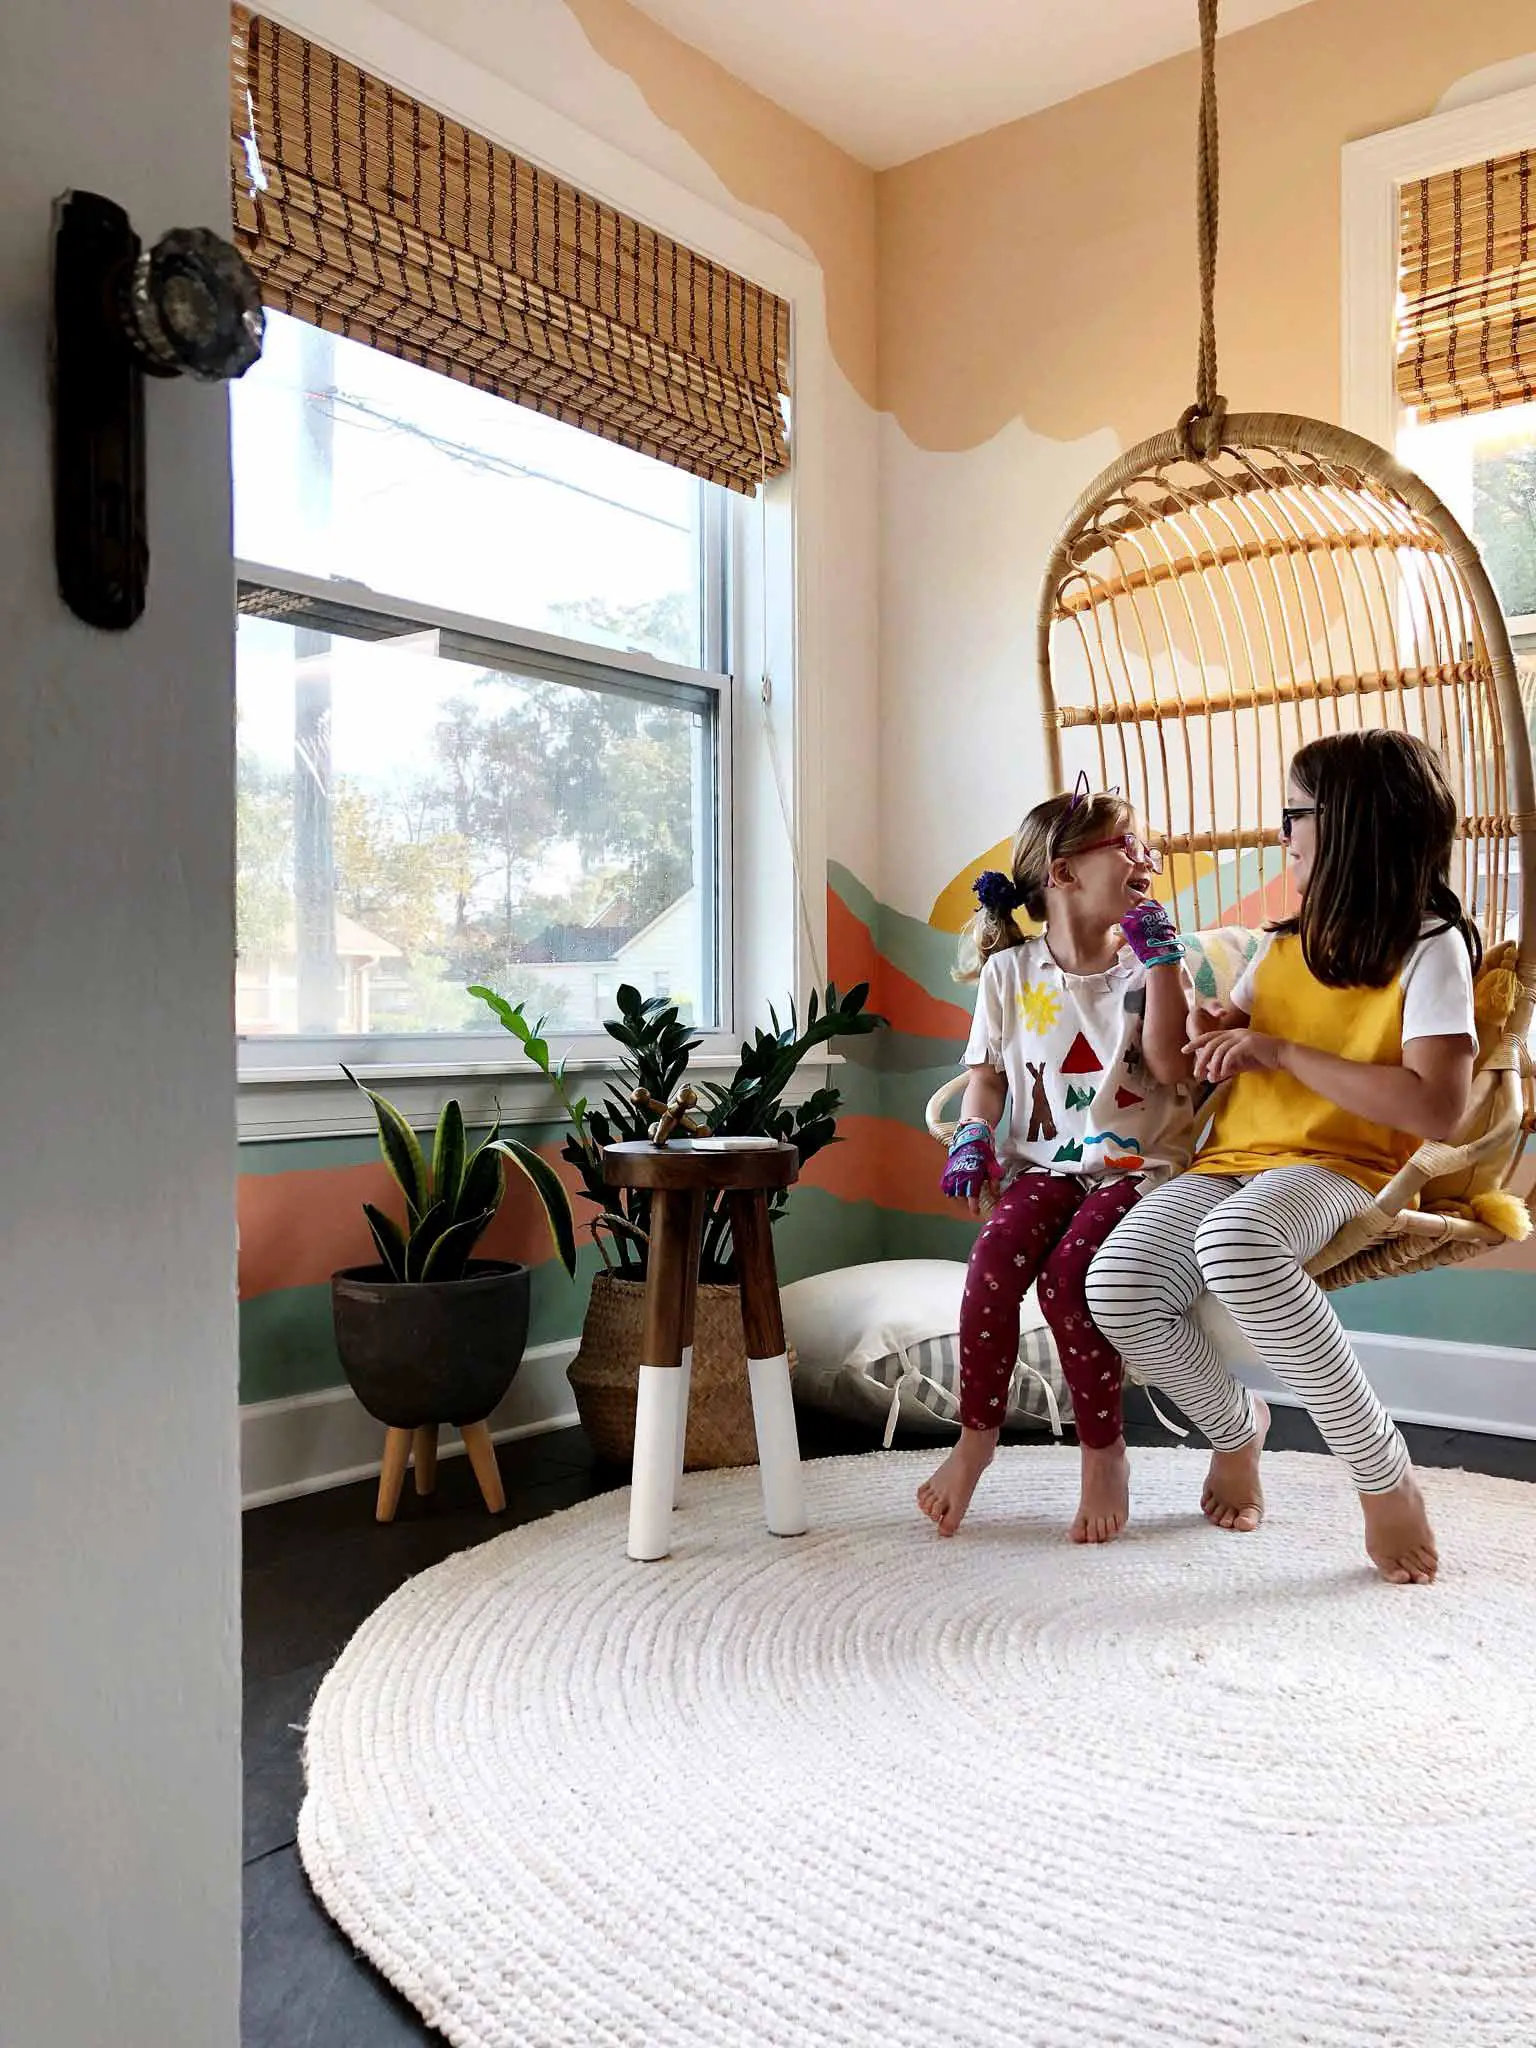 playroom with colorful mural and two girls in hanging chair